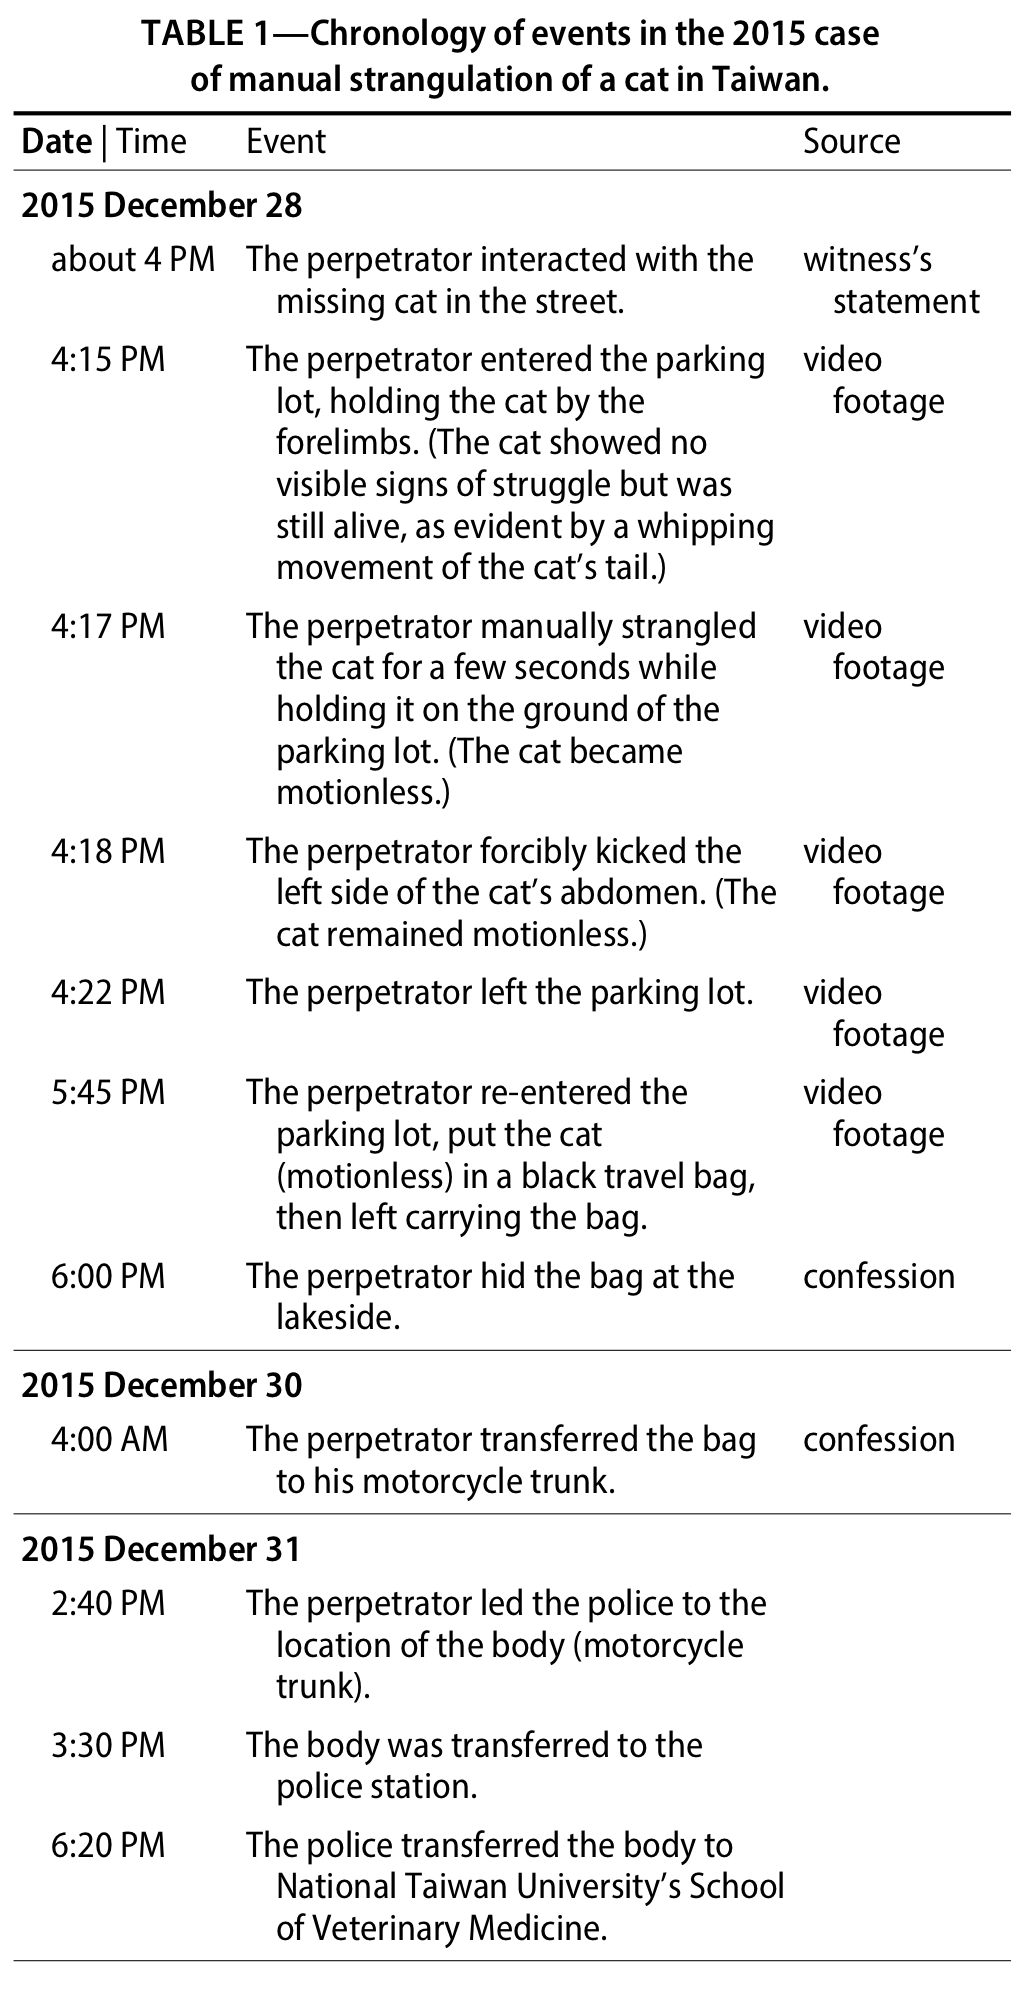 Table 1—Chronology of events in the 2015 case of manual strangulation of a cat in Taiwan.